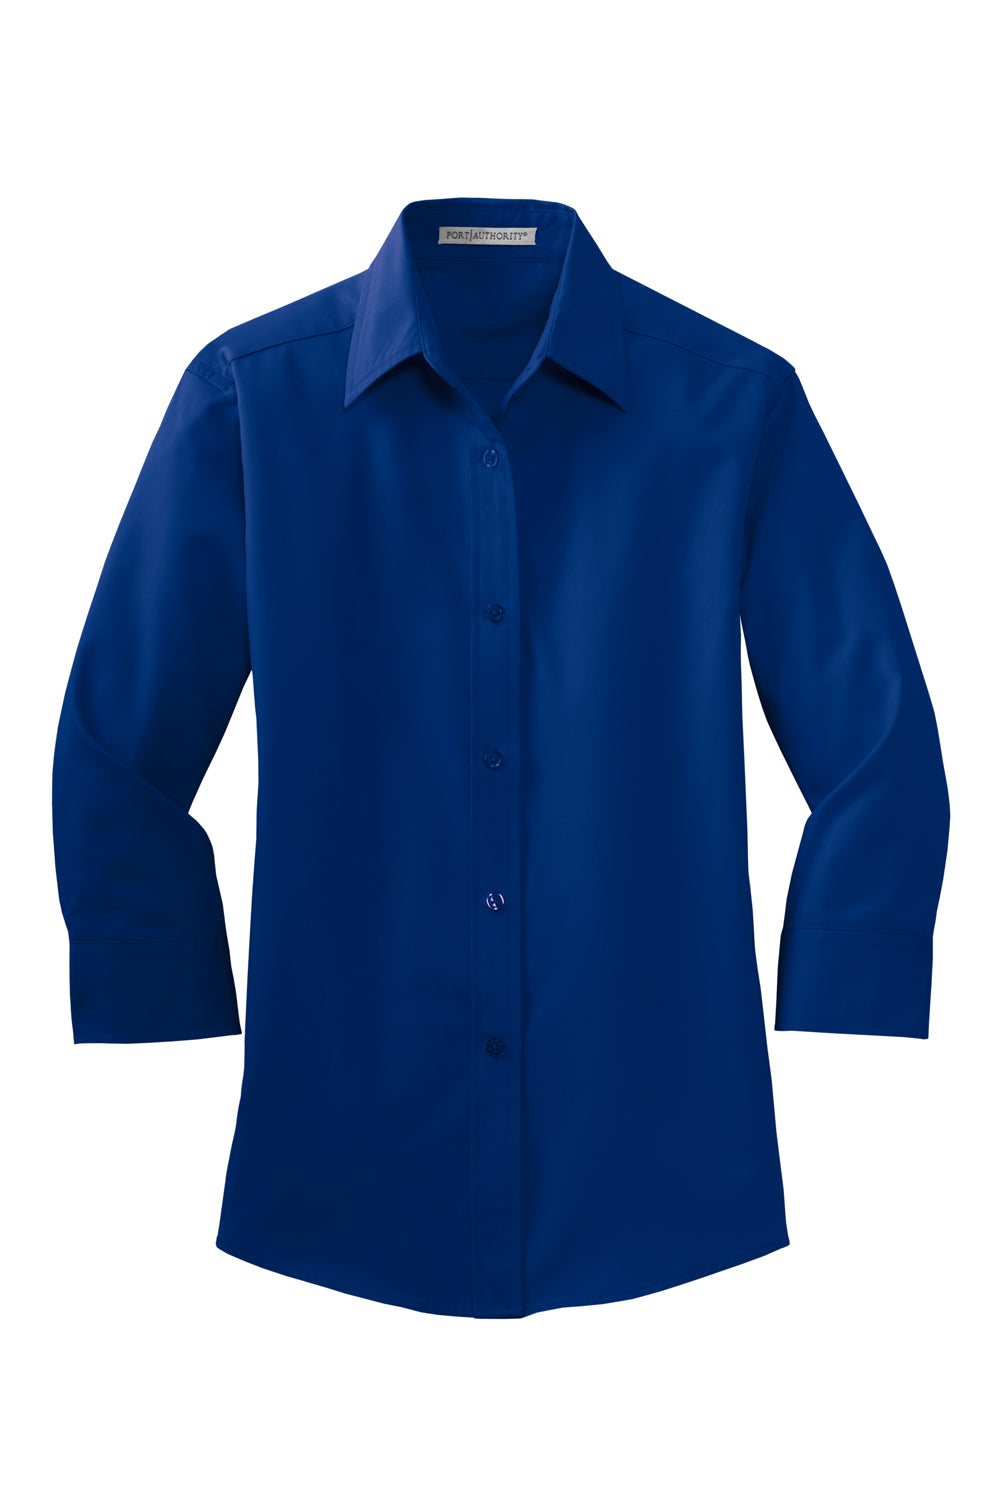 Port Authority L612 Womens Easy Care Wrinkle Resistant 3/4 Sleeve Button Down Shirt Royal Blue Flat Front